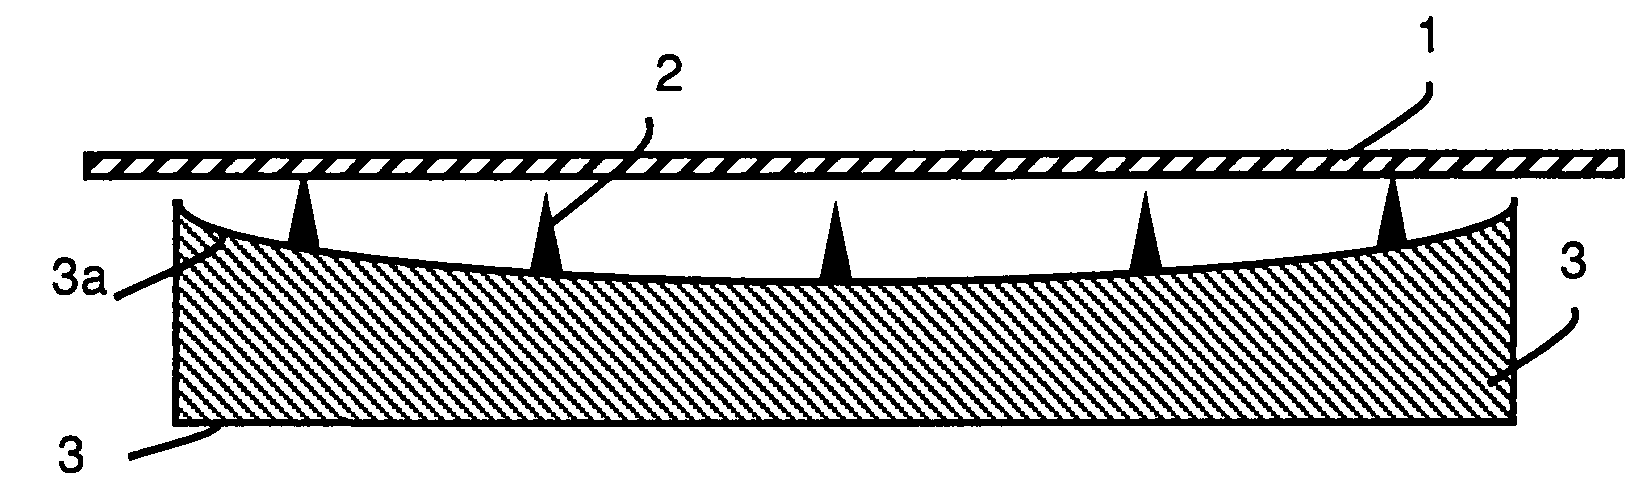 Device for Recording Data Comprising Mirodots With Free Ends Forming a Convex Surface and Method for the Production Thereof